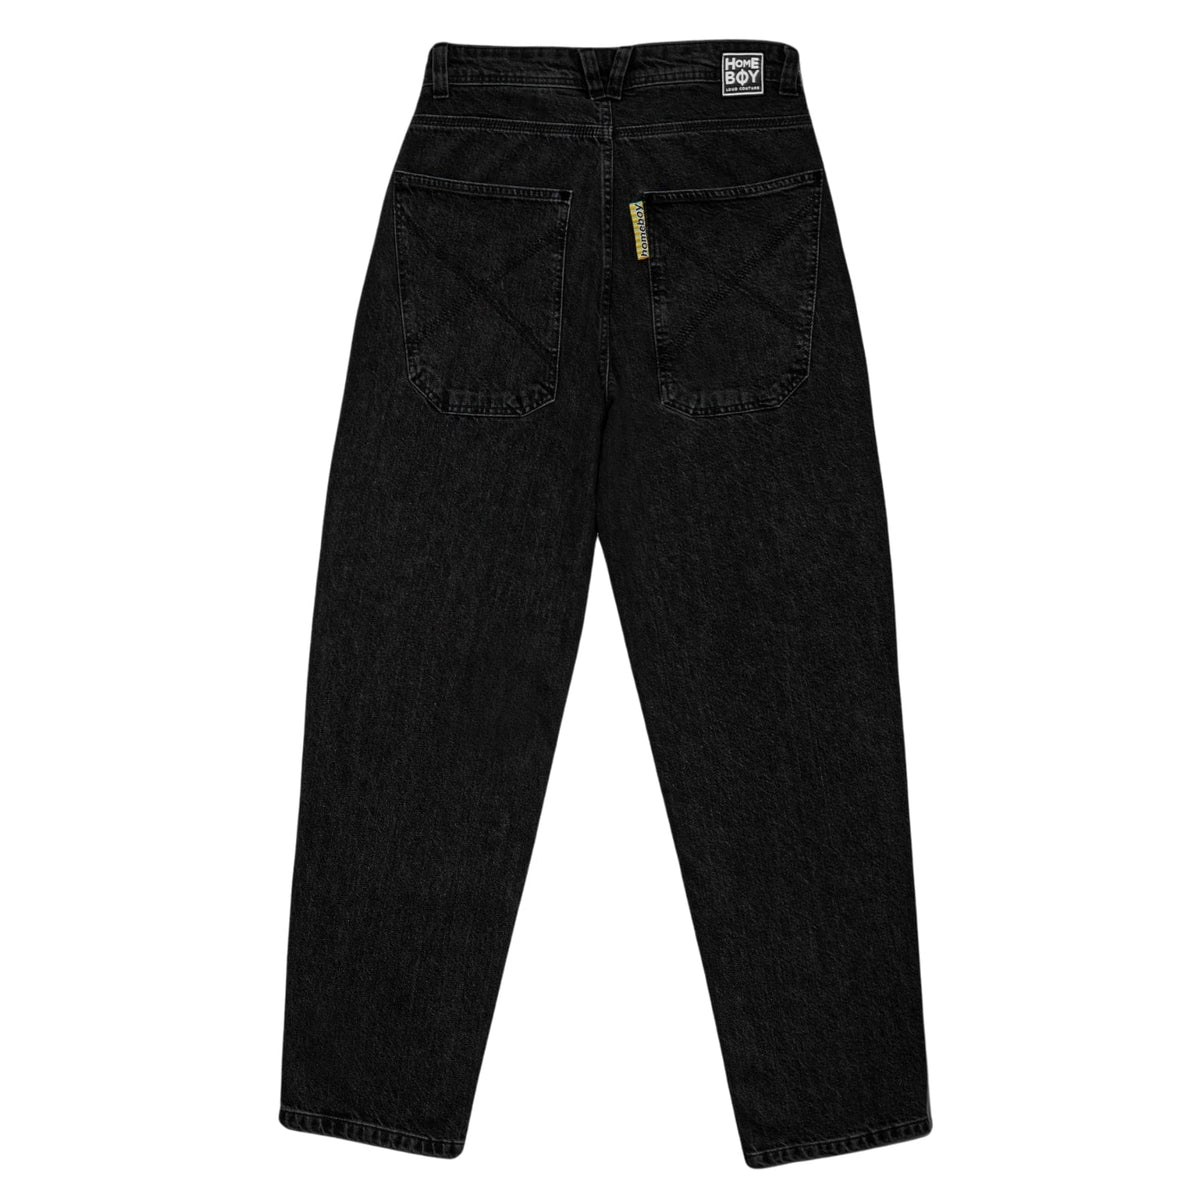 Home Boy X-Tra Baggy Denim - Washed Black - Mens Relaxed/Loose Denim Jeans by Home Boy